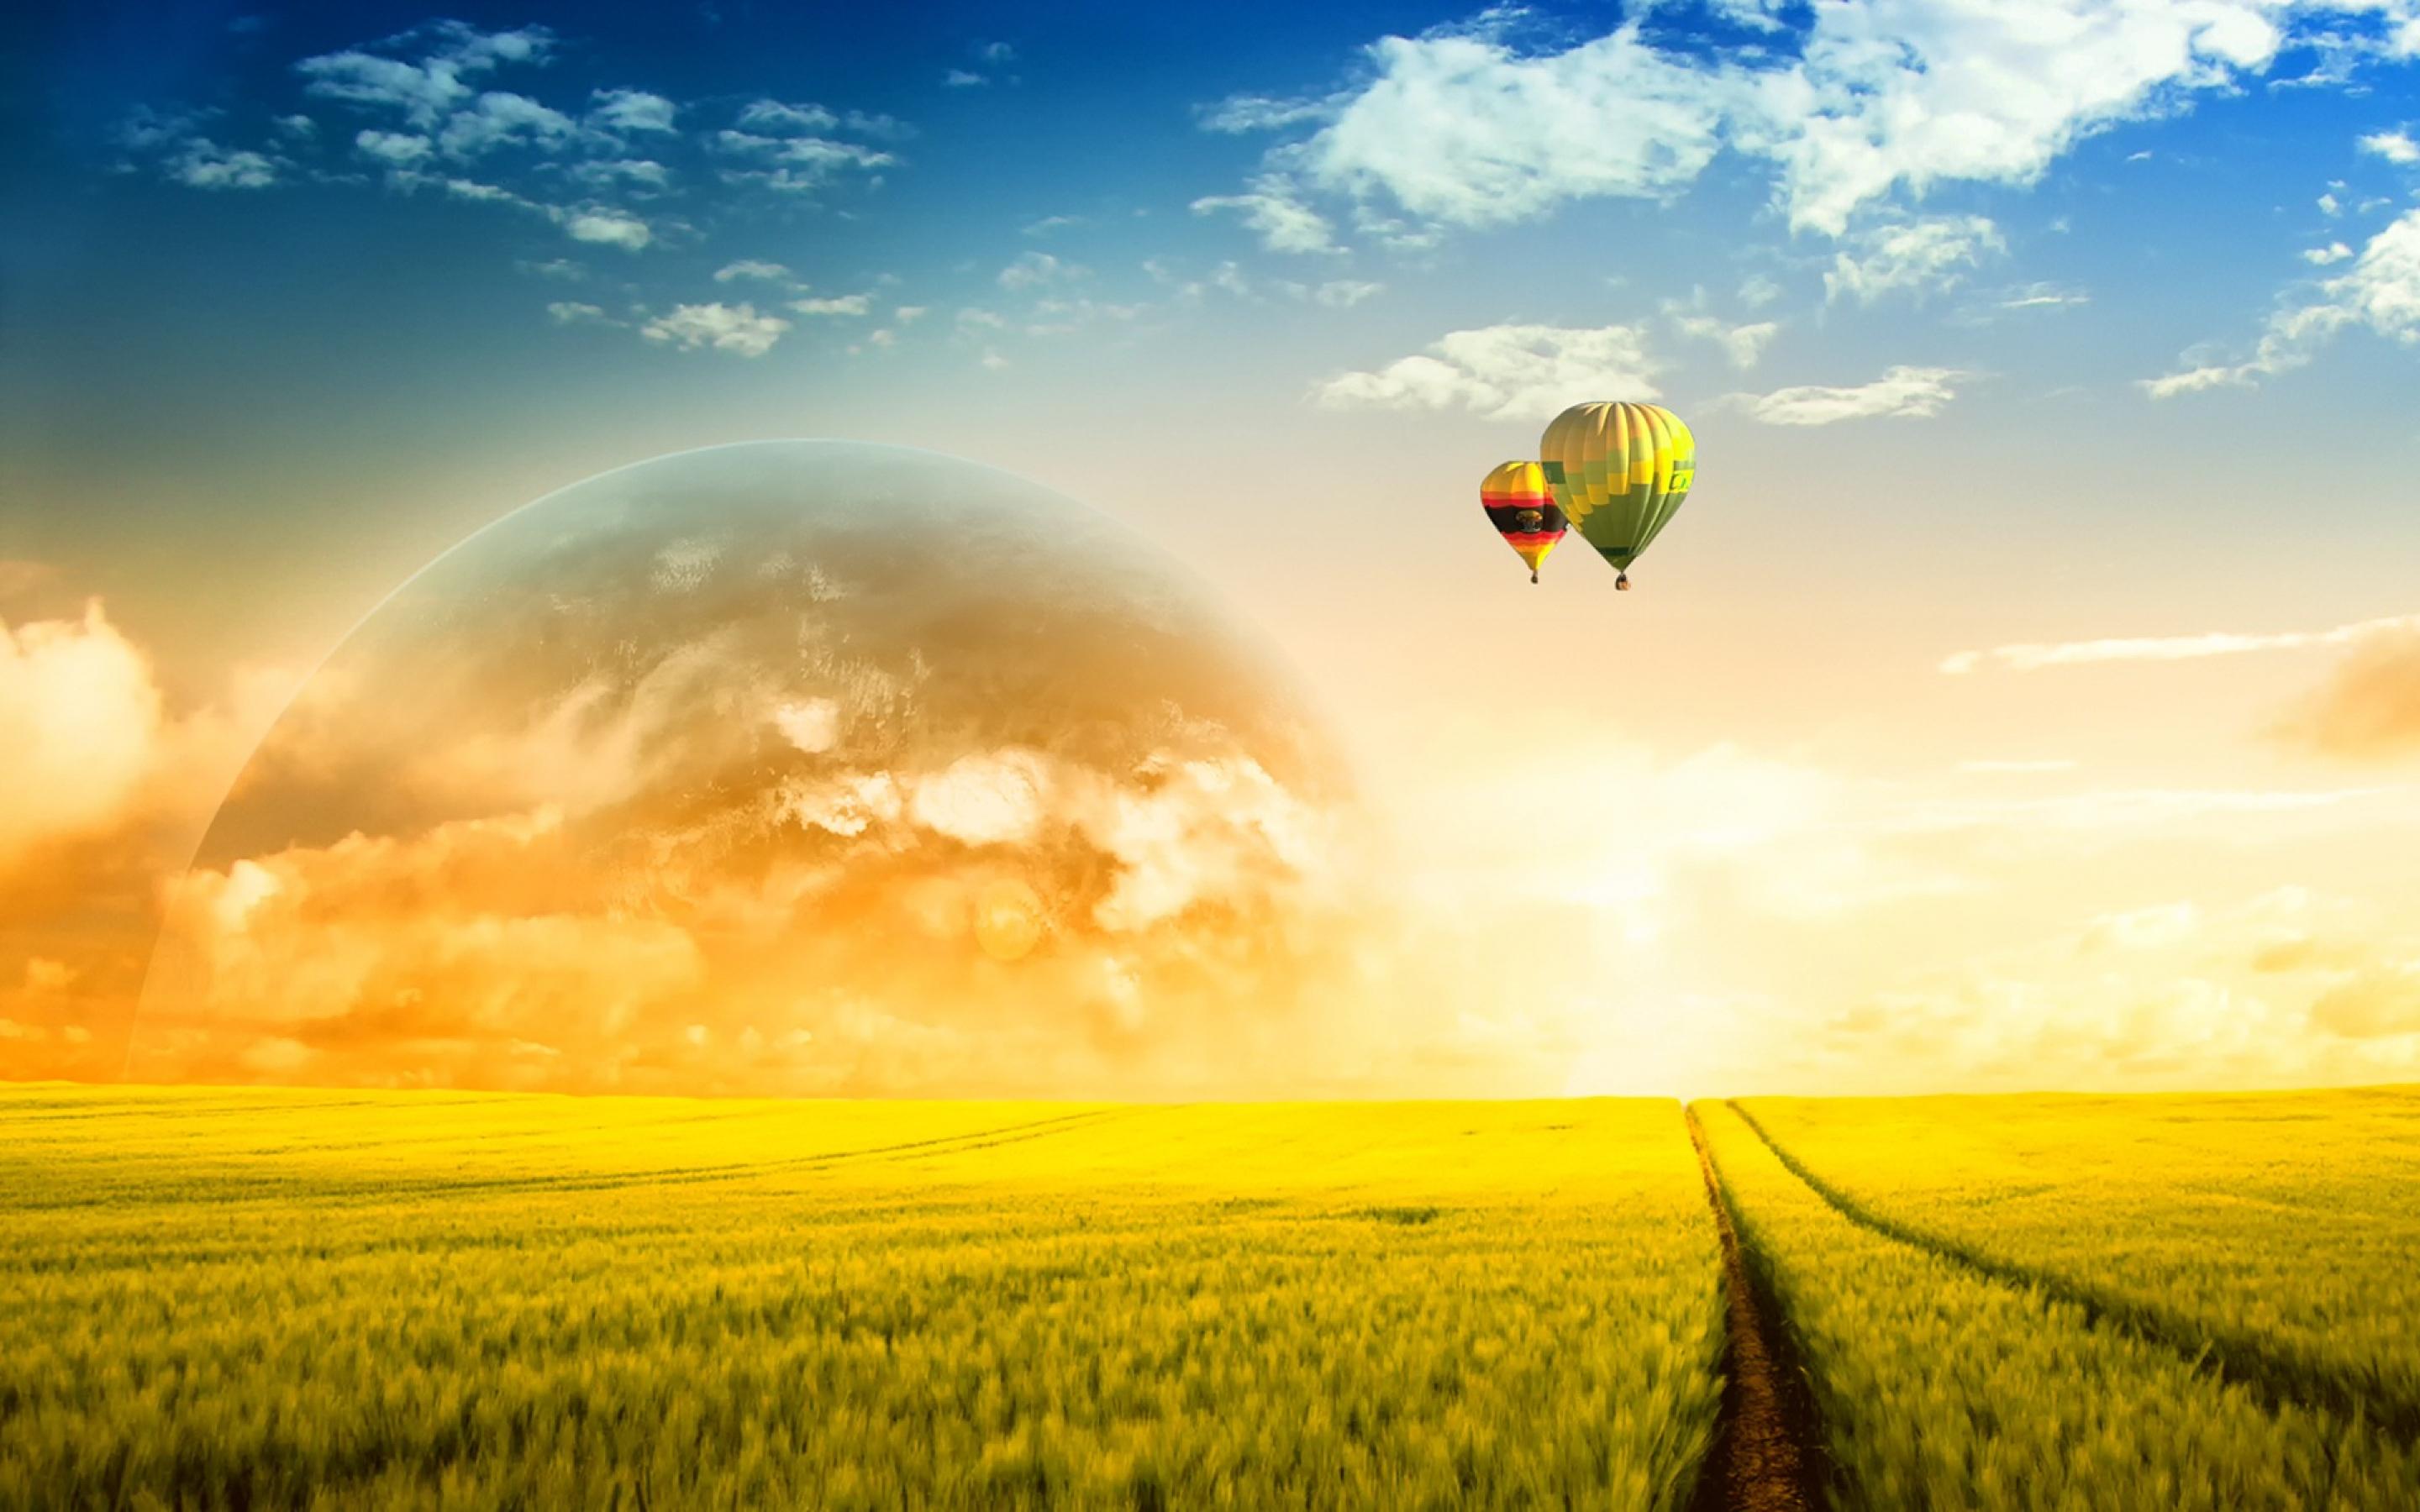 free hd wallpaper backgrounds,hot air ballooning,people in nature,natural landscape,sky,hot air balloon